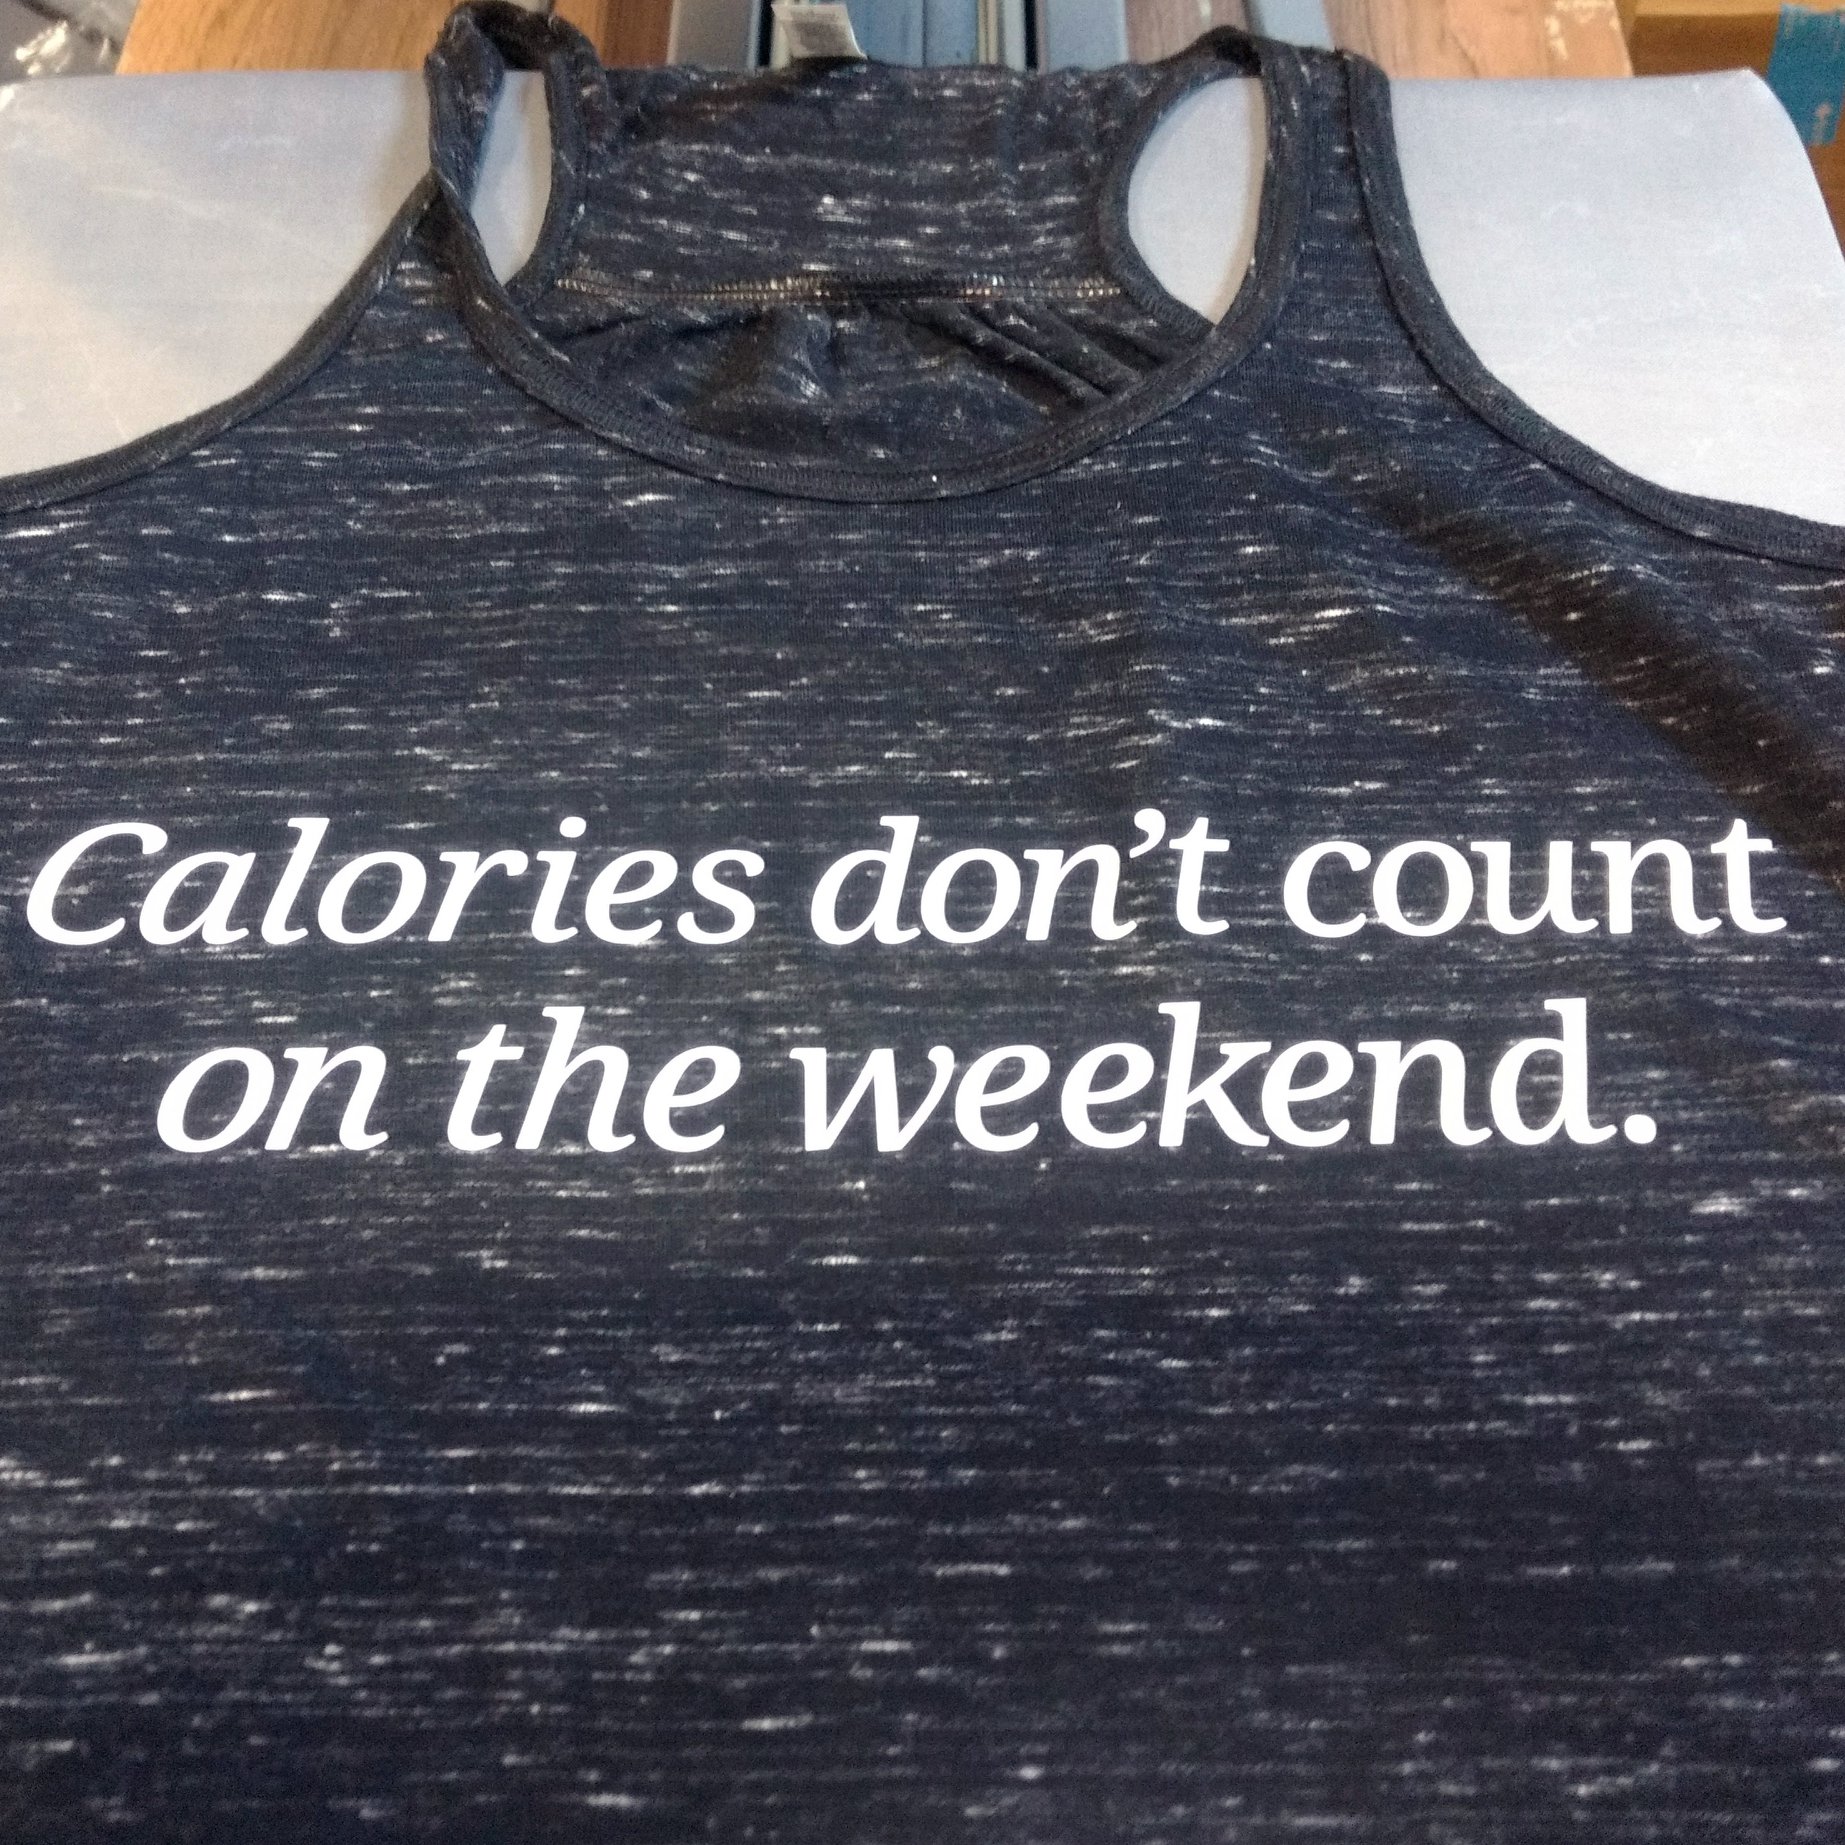 Calories don't count on the weekend.